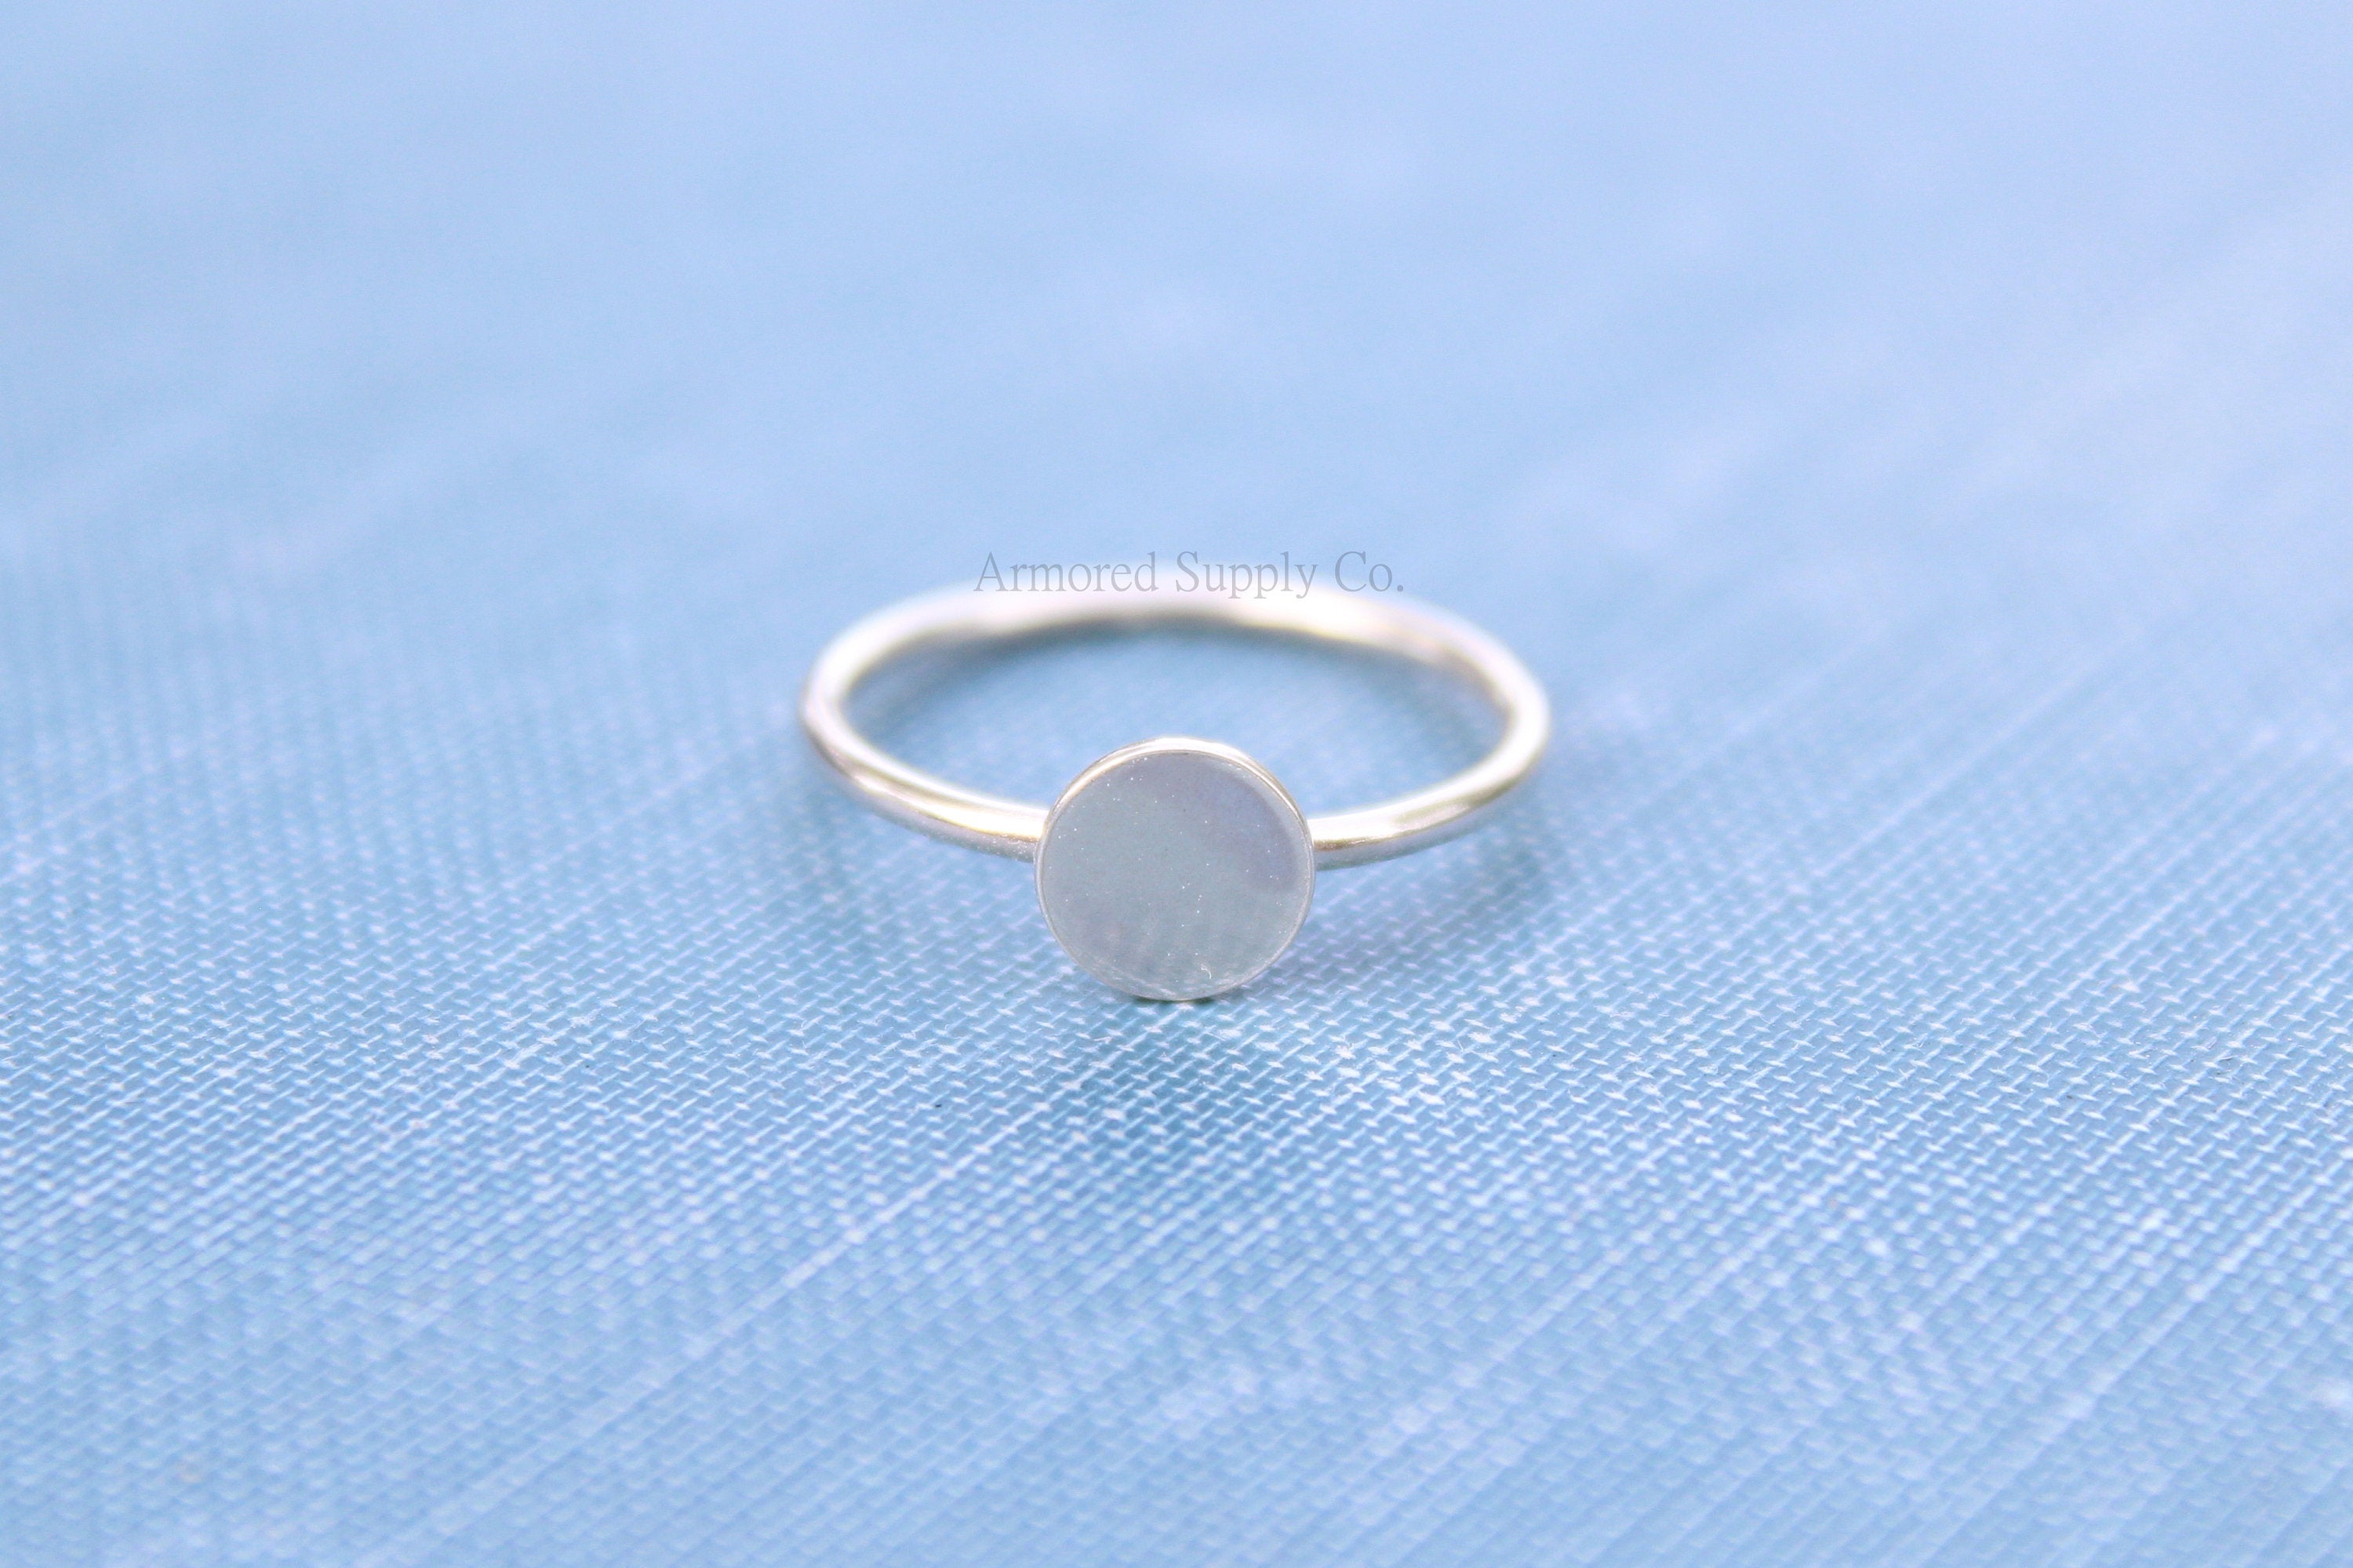 Silver Disc Pad Ring Blank, Round Cabochon, Resin Glue Pad Breast Milk, DIY jewelry supplies, build your ring, wholesale jewelry, diy ring